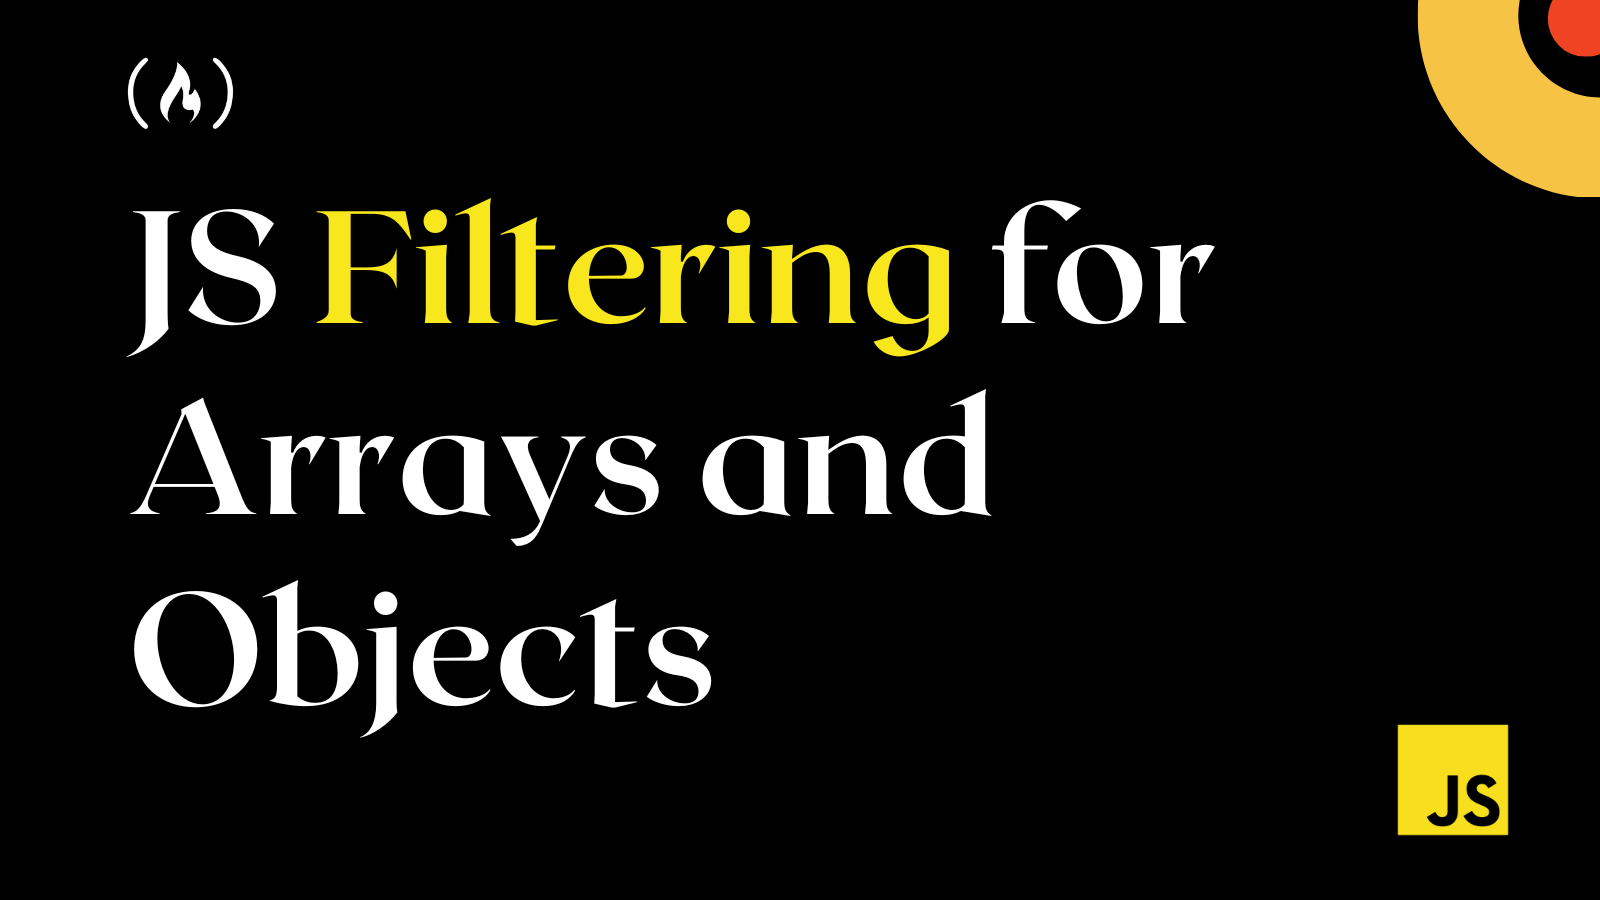 How to Filter an Array in JavaScript – JS Filtering for Arrays and Objects